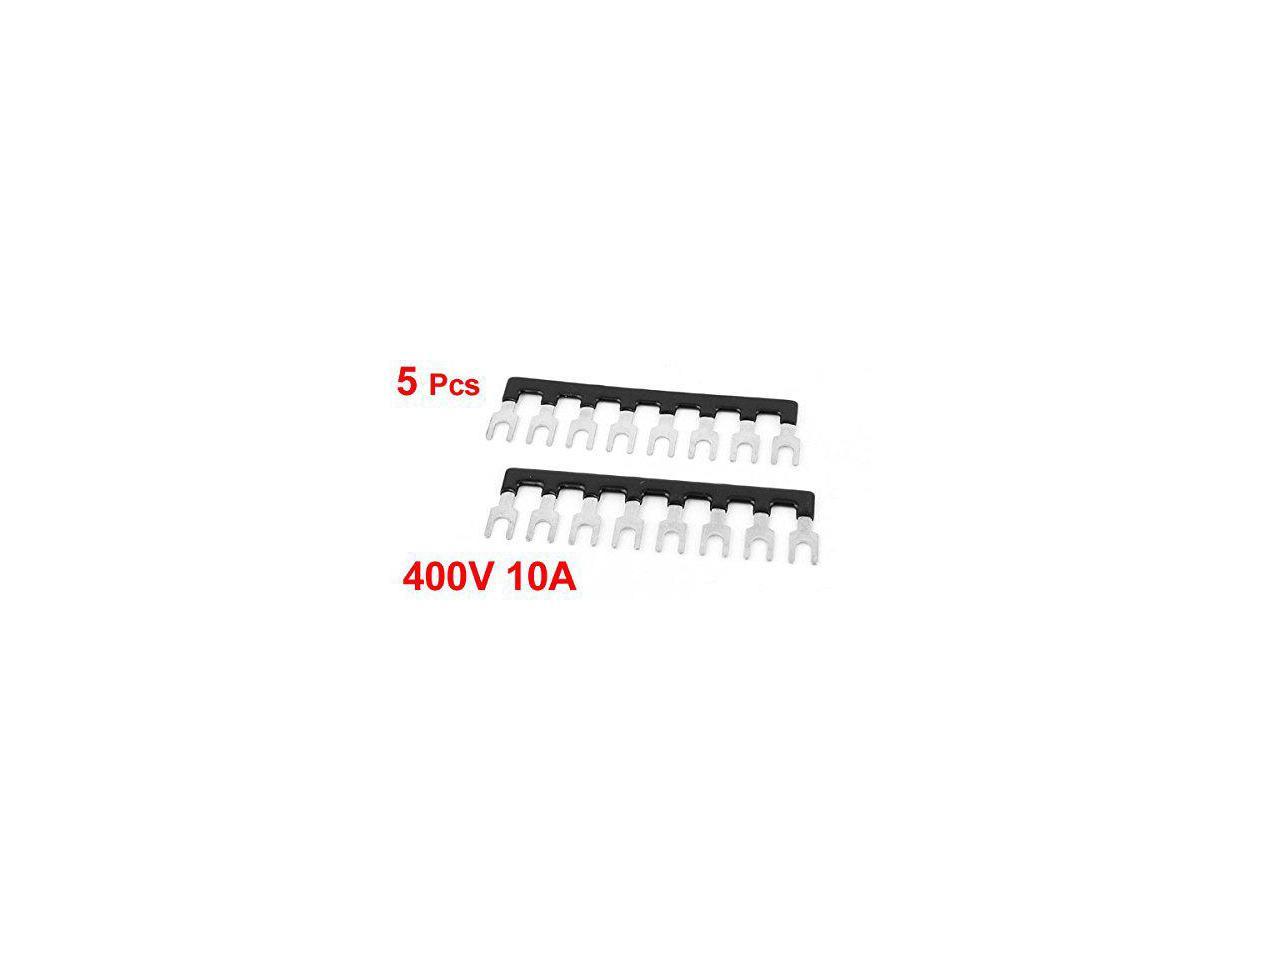 Uxcell A15071300ux0988 5 Pcs Fork Type 8 Postions Terminal Strip Jumper Block